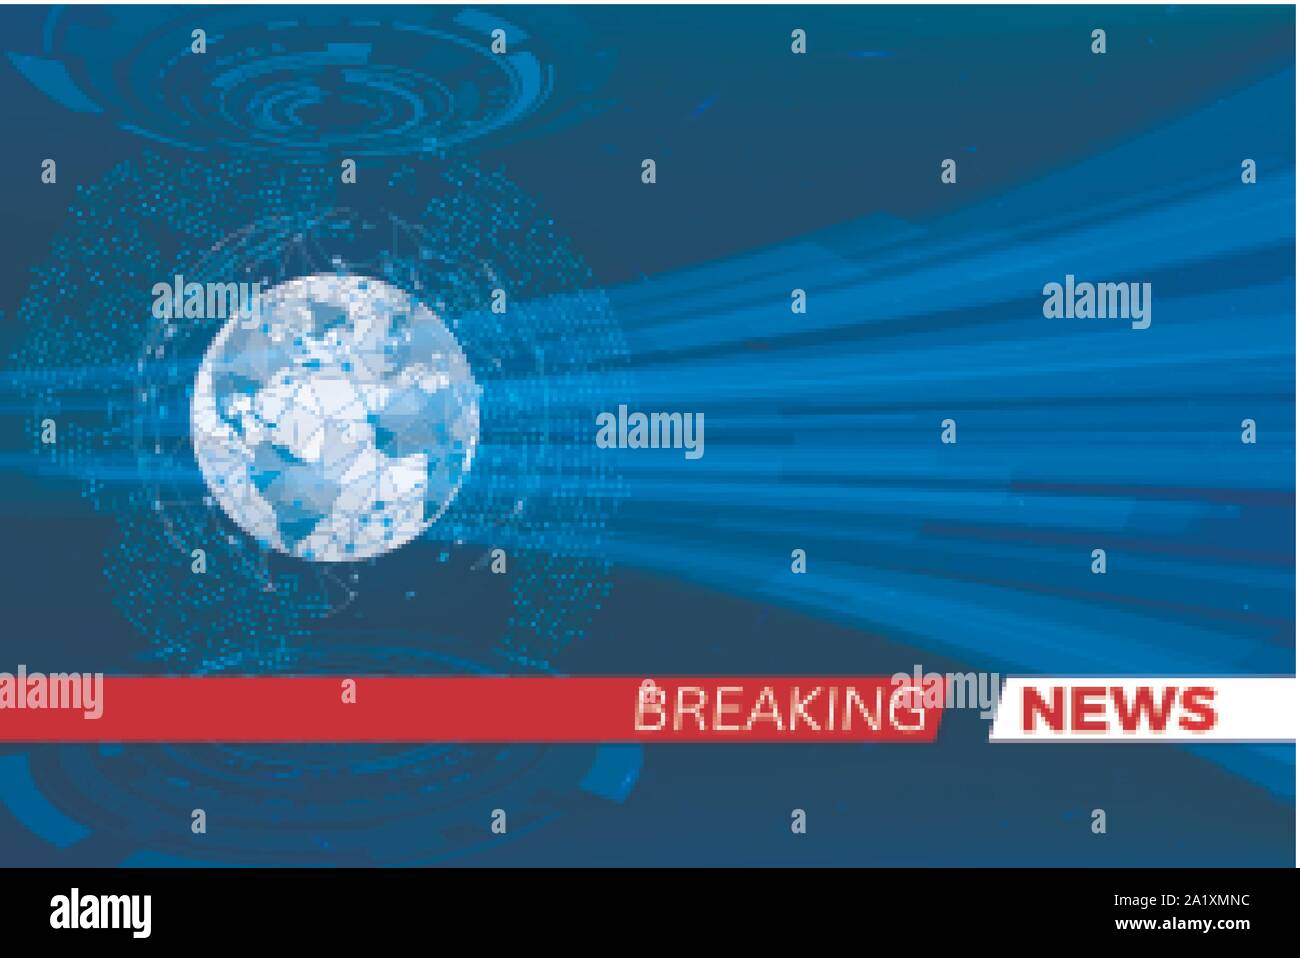 Breaking News Background High Resolution Stock Photography And Images Alamy